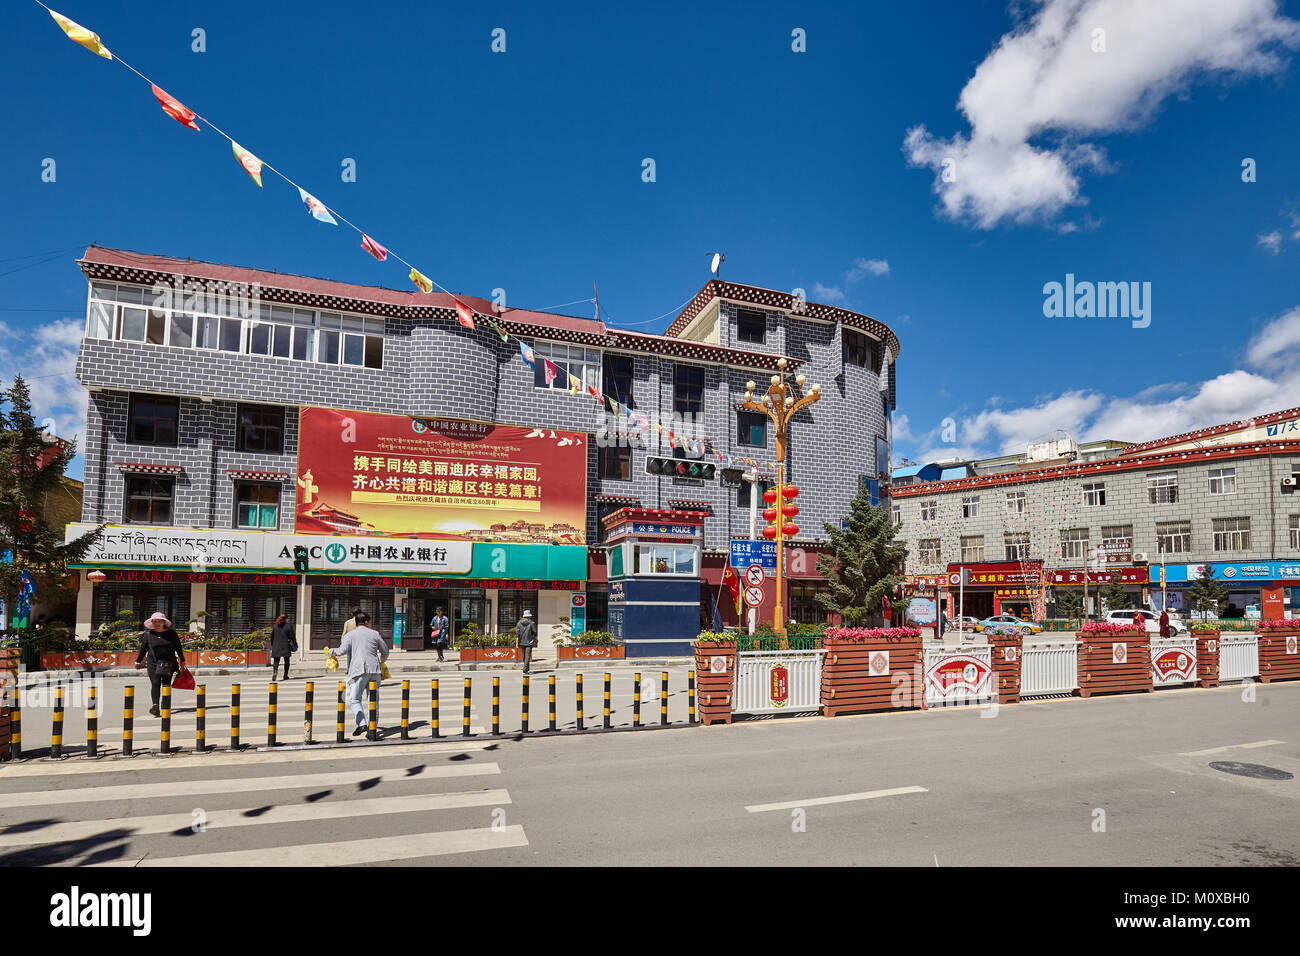 Shangri-La, China - September 24, 2017: City downtown, formerly called Zhongdian. Stock Photo